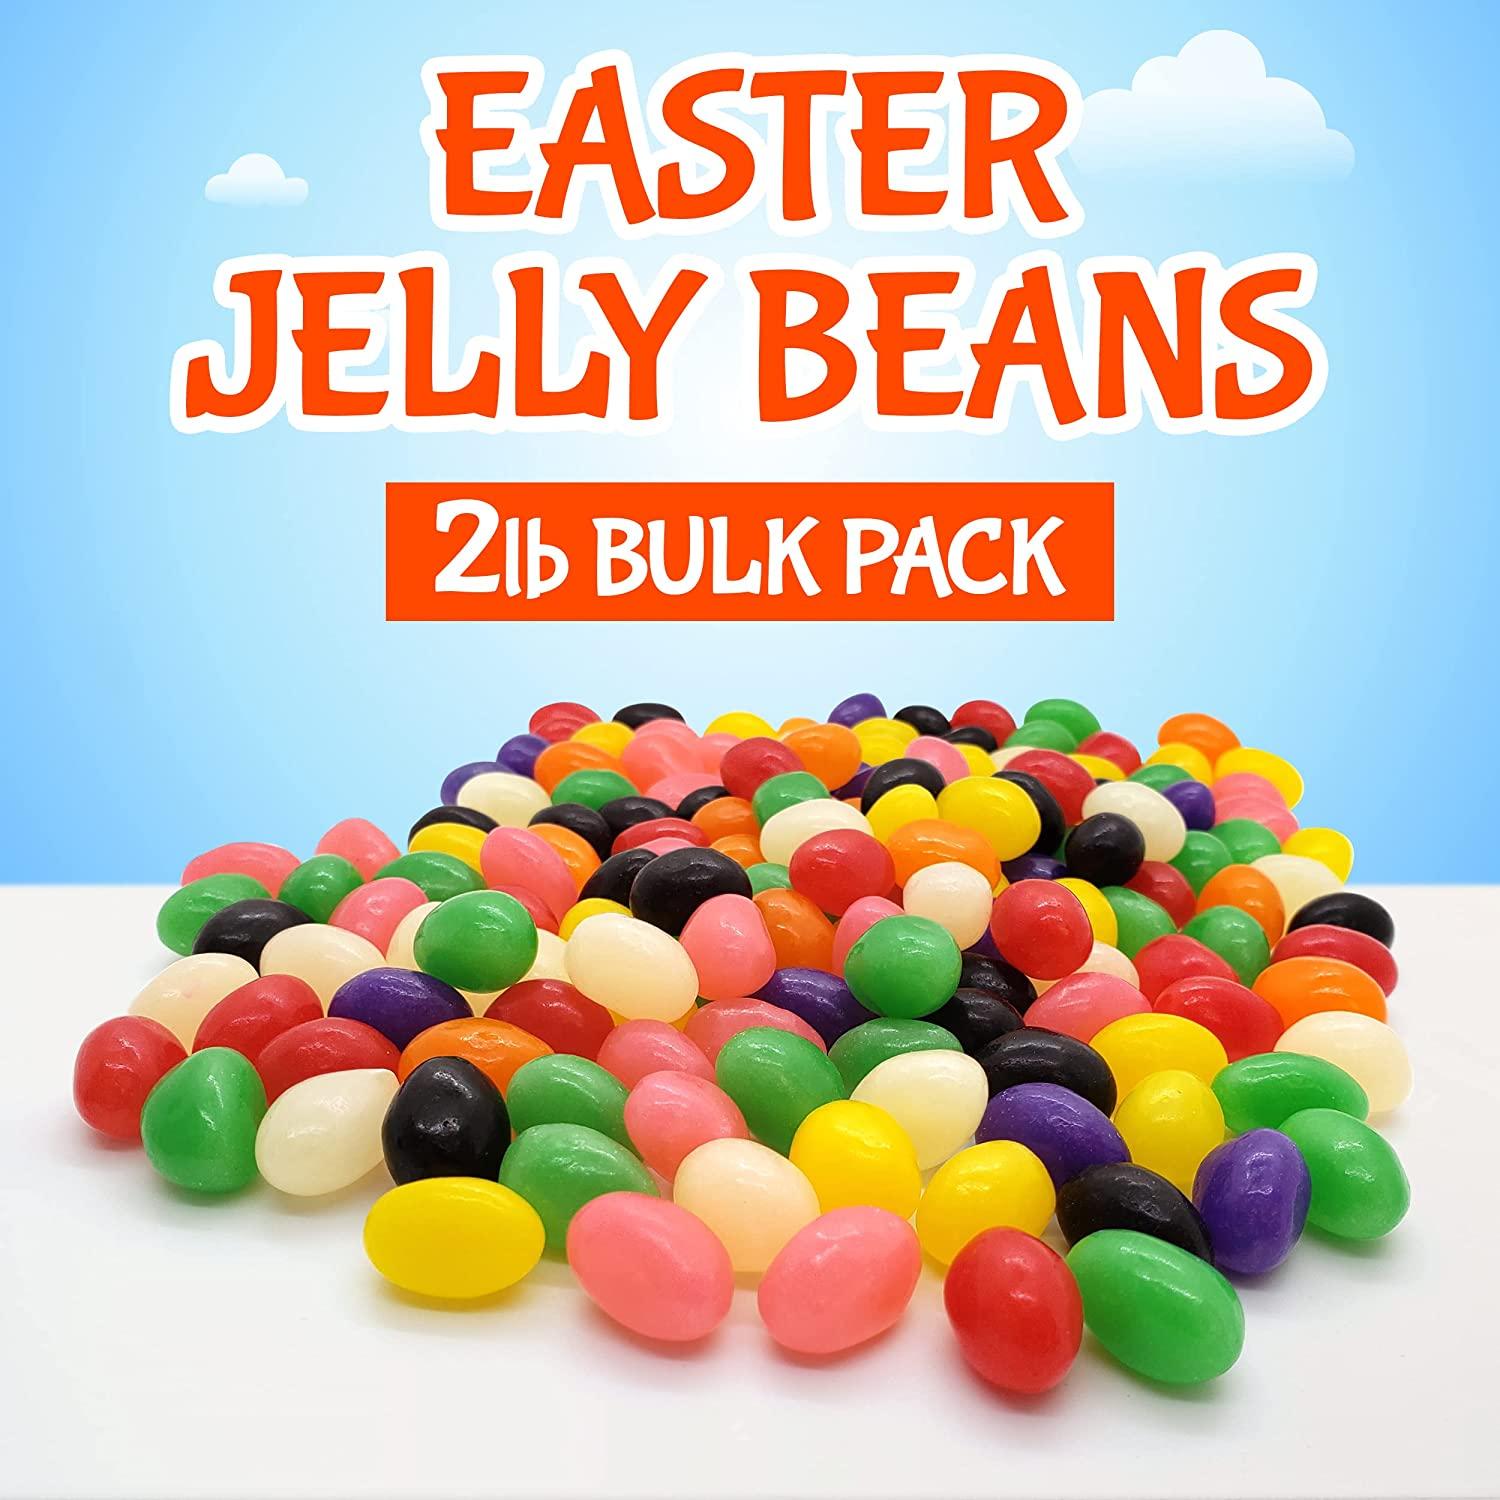 Brach's Classic Jelly Beans 2LB Bulk Candy Bag - Candy Variety Pack with  Delicious and Intense Fruity Flavors Easter Candy Jelly Beans Candy Bag  Ideal for Parties, Candy Bowl Fillers 2 Pound (